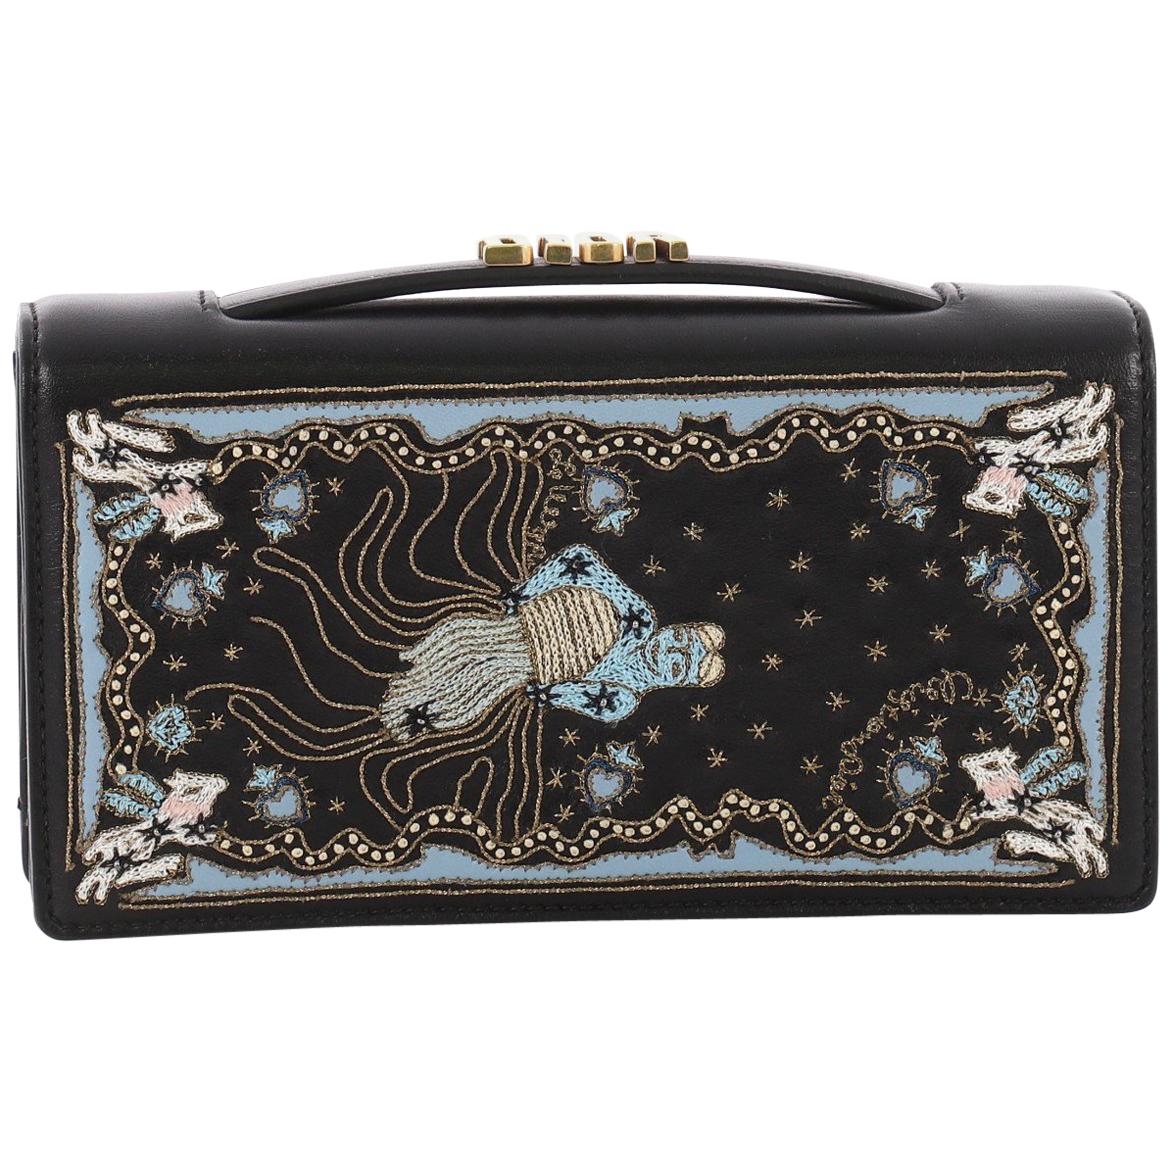 Diors New Tarot Bags and More Have Arrived on Bergdorf Goodmans Website   PurseBlog